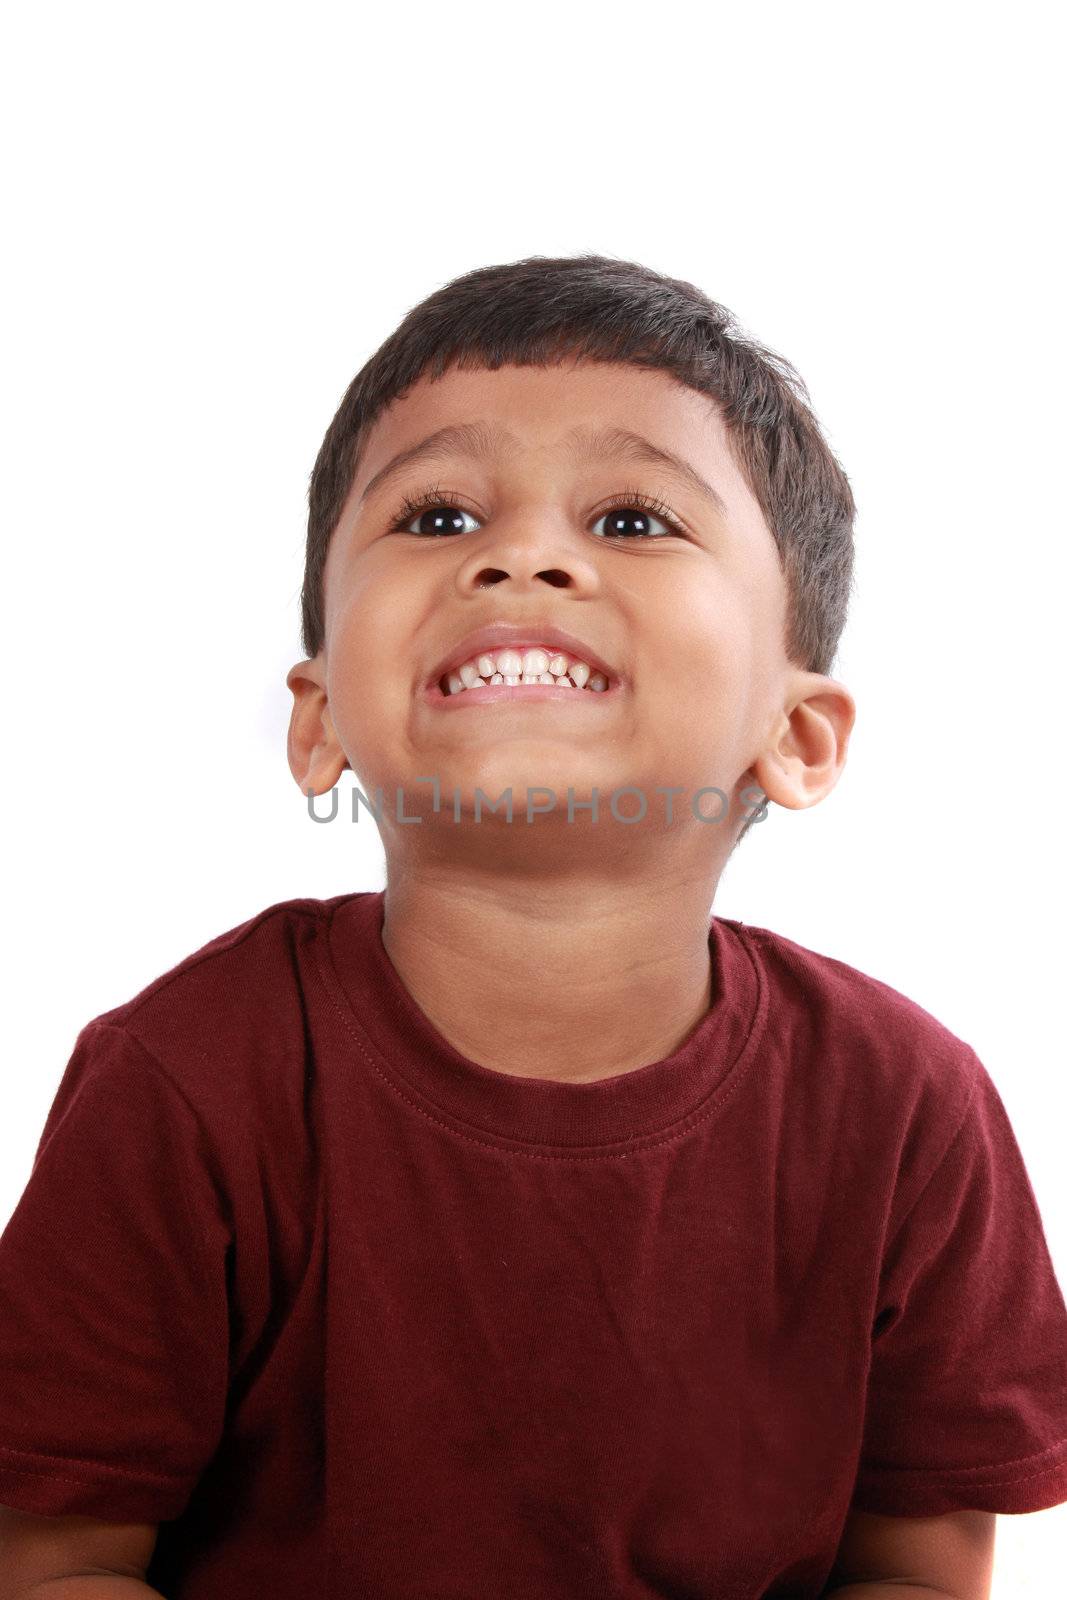 A portrait of a cute Indian boy showing his teeth, on white studio background.